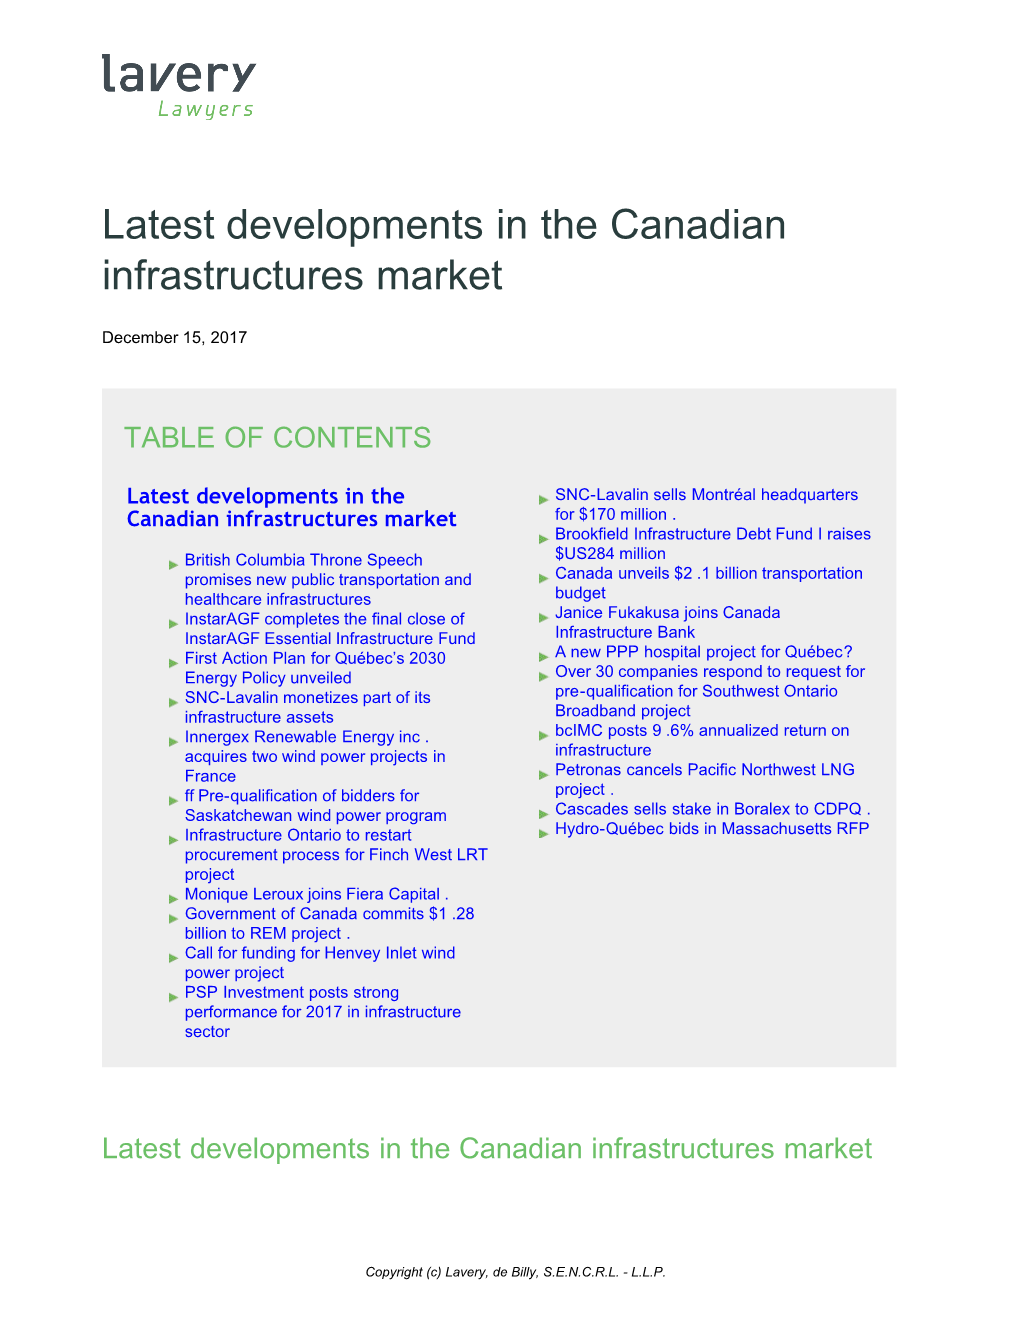 Latest Developments in the Canadian Infrastructures Market